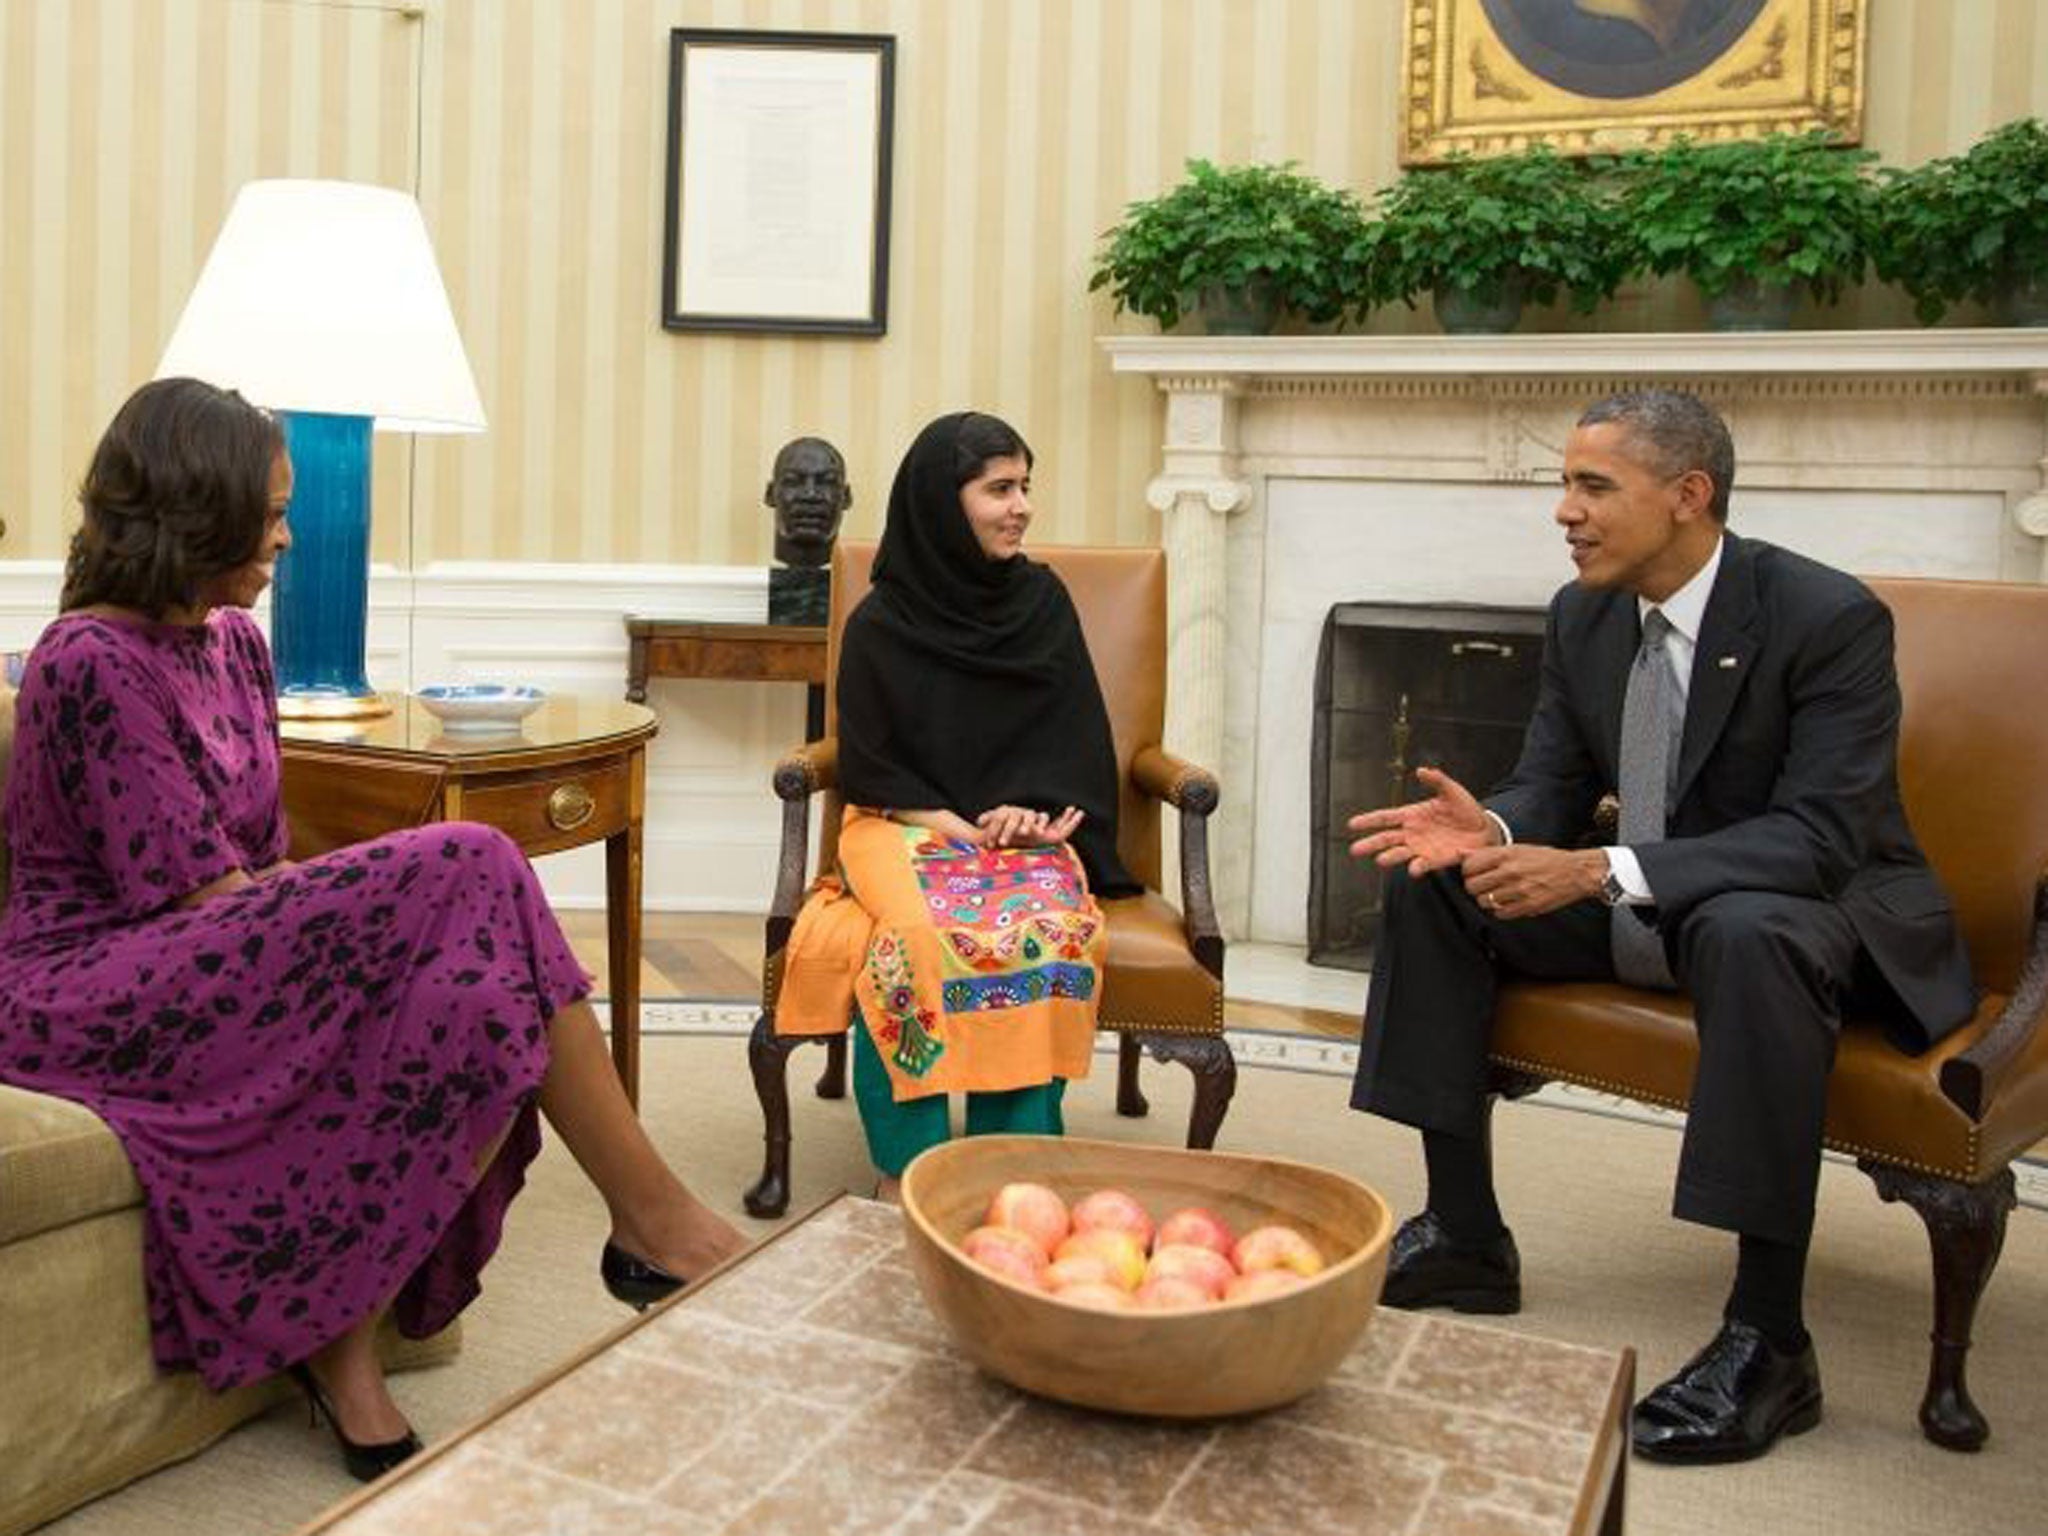 US President Barack Obama and US First Lady Michelle Obama (2-L), a meet with Malala Yousafzai, the young Pakistani schoolgirl who was shot in the head by the Taliban a year ago, in the Oval Office, Washington